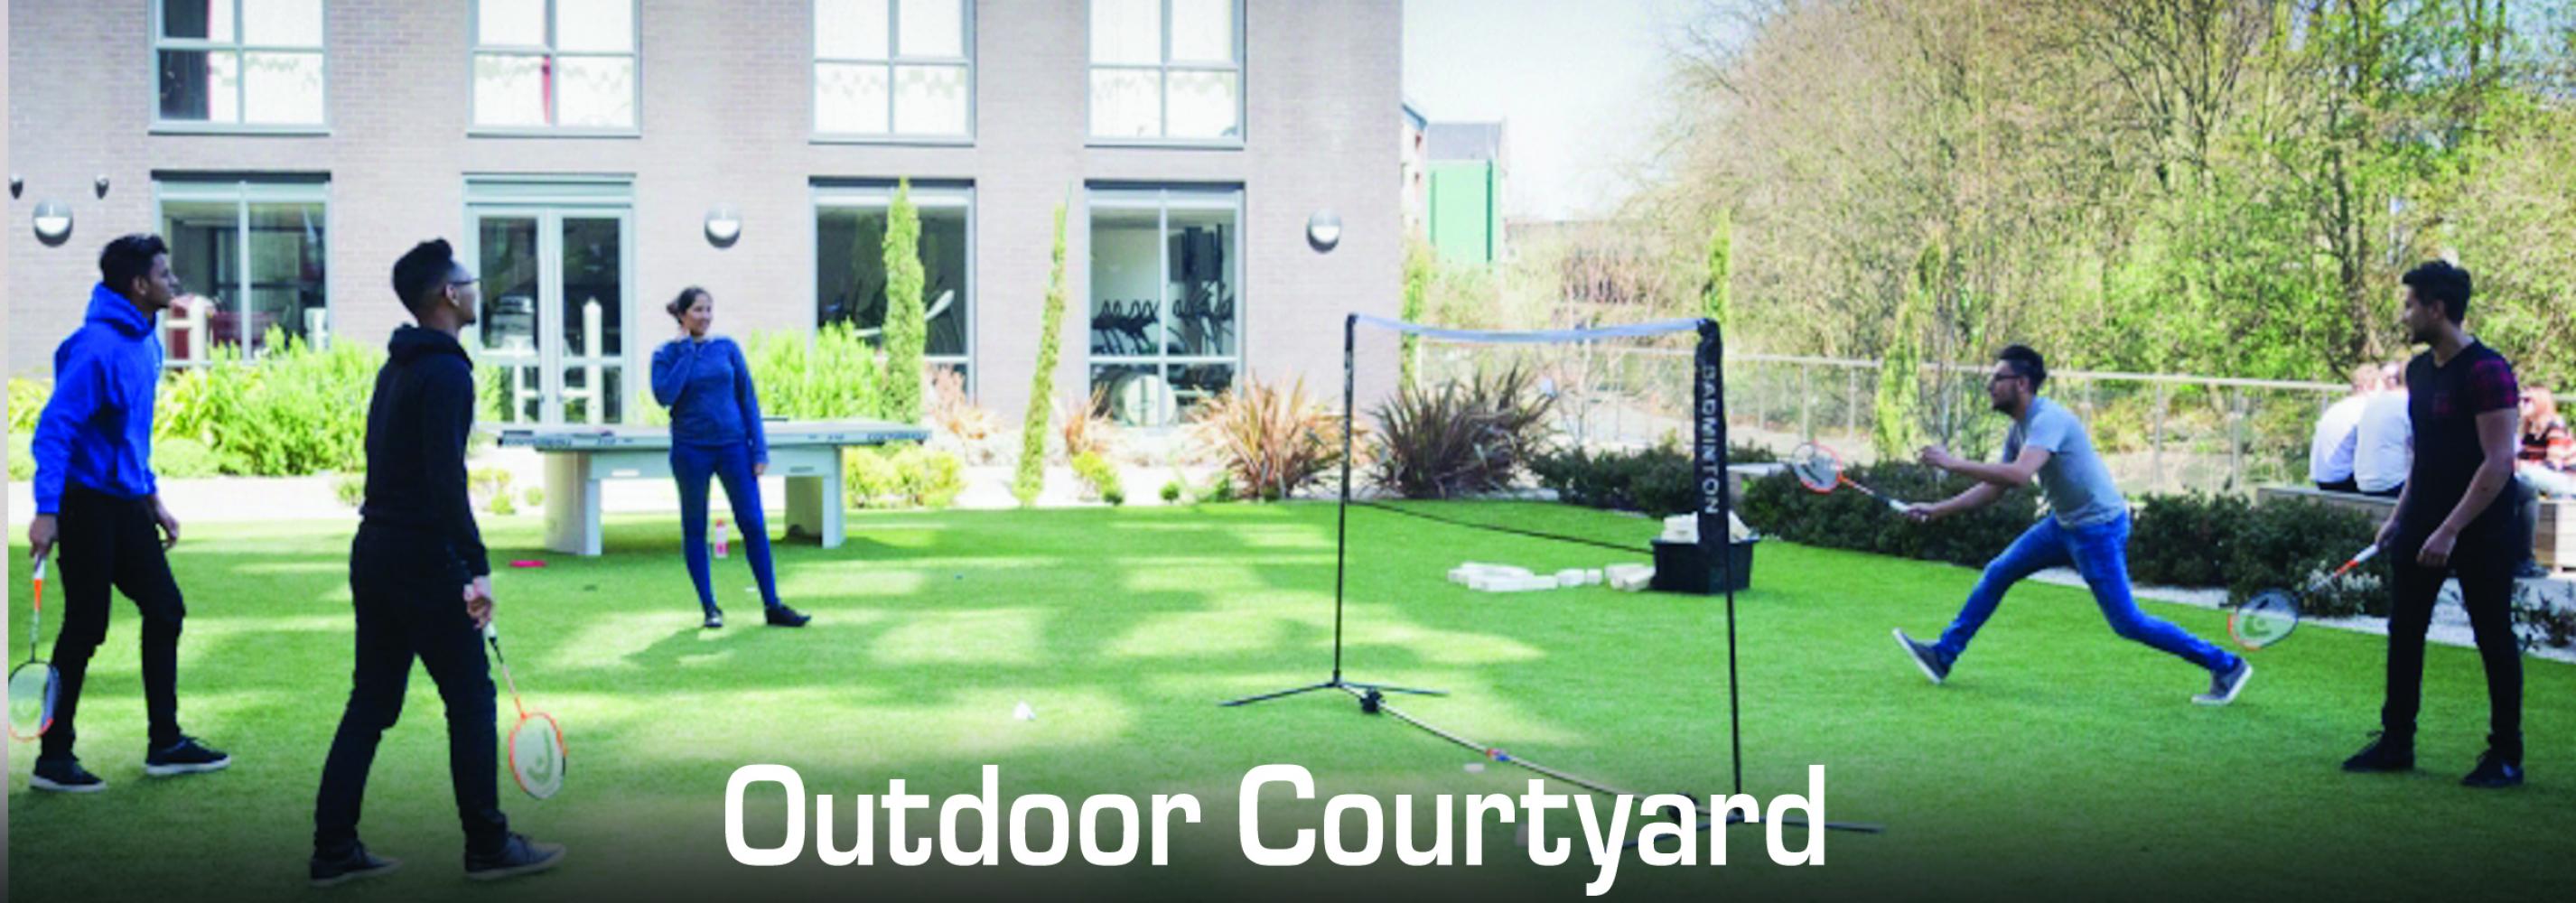 Relax or play games in our outdoor courtyard